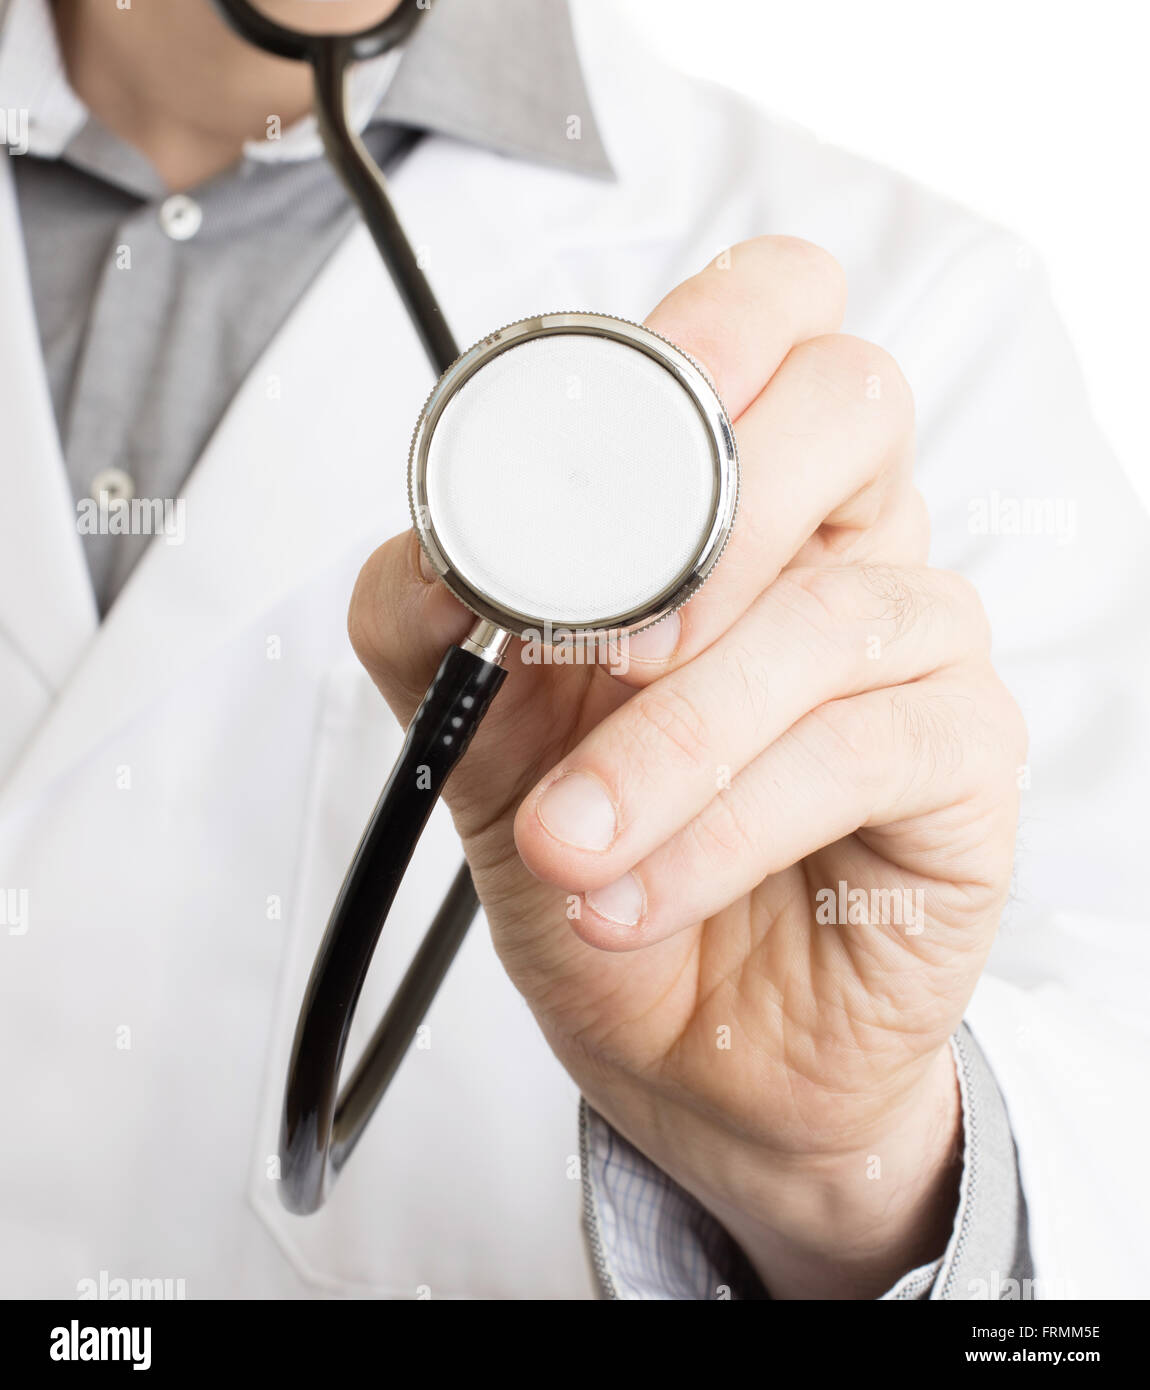 Medical doctor with a stethoscope and hands behind his back Stock Photo -  Alamy